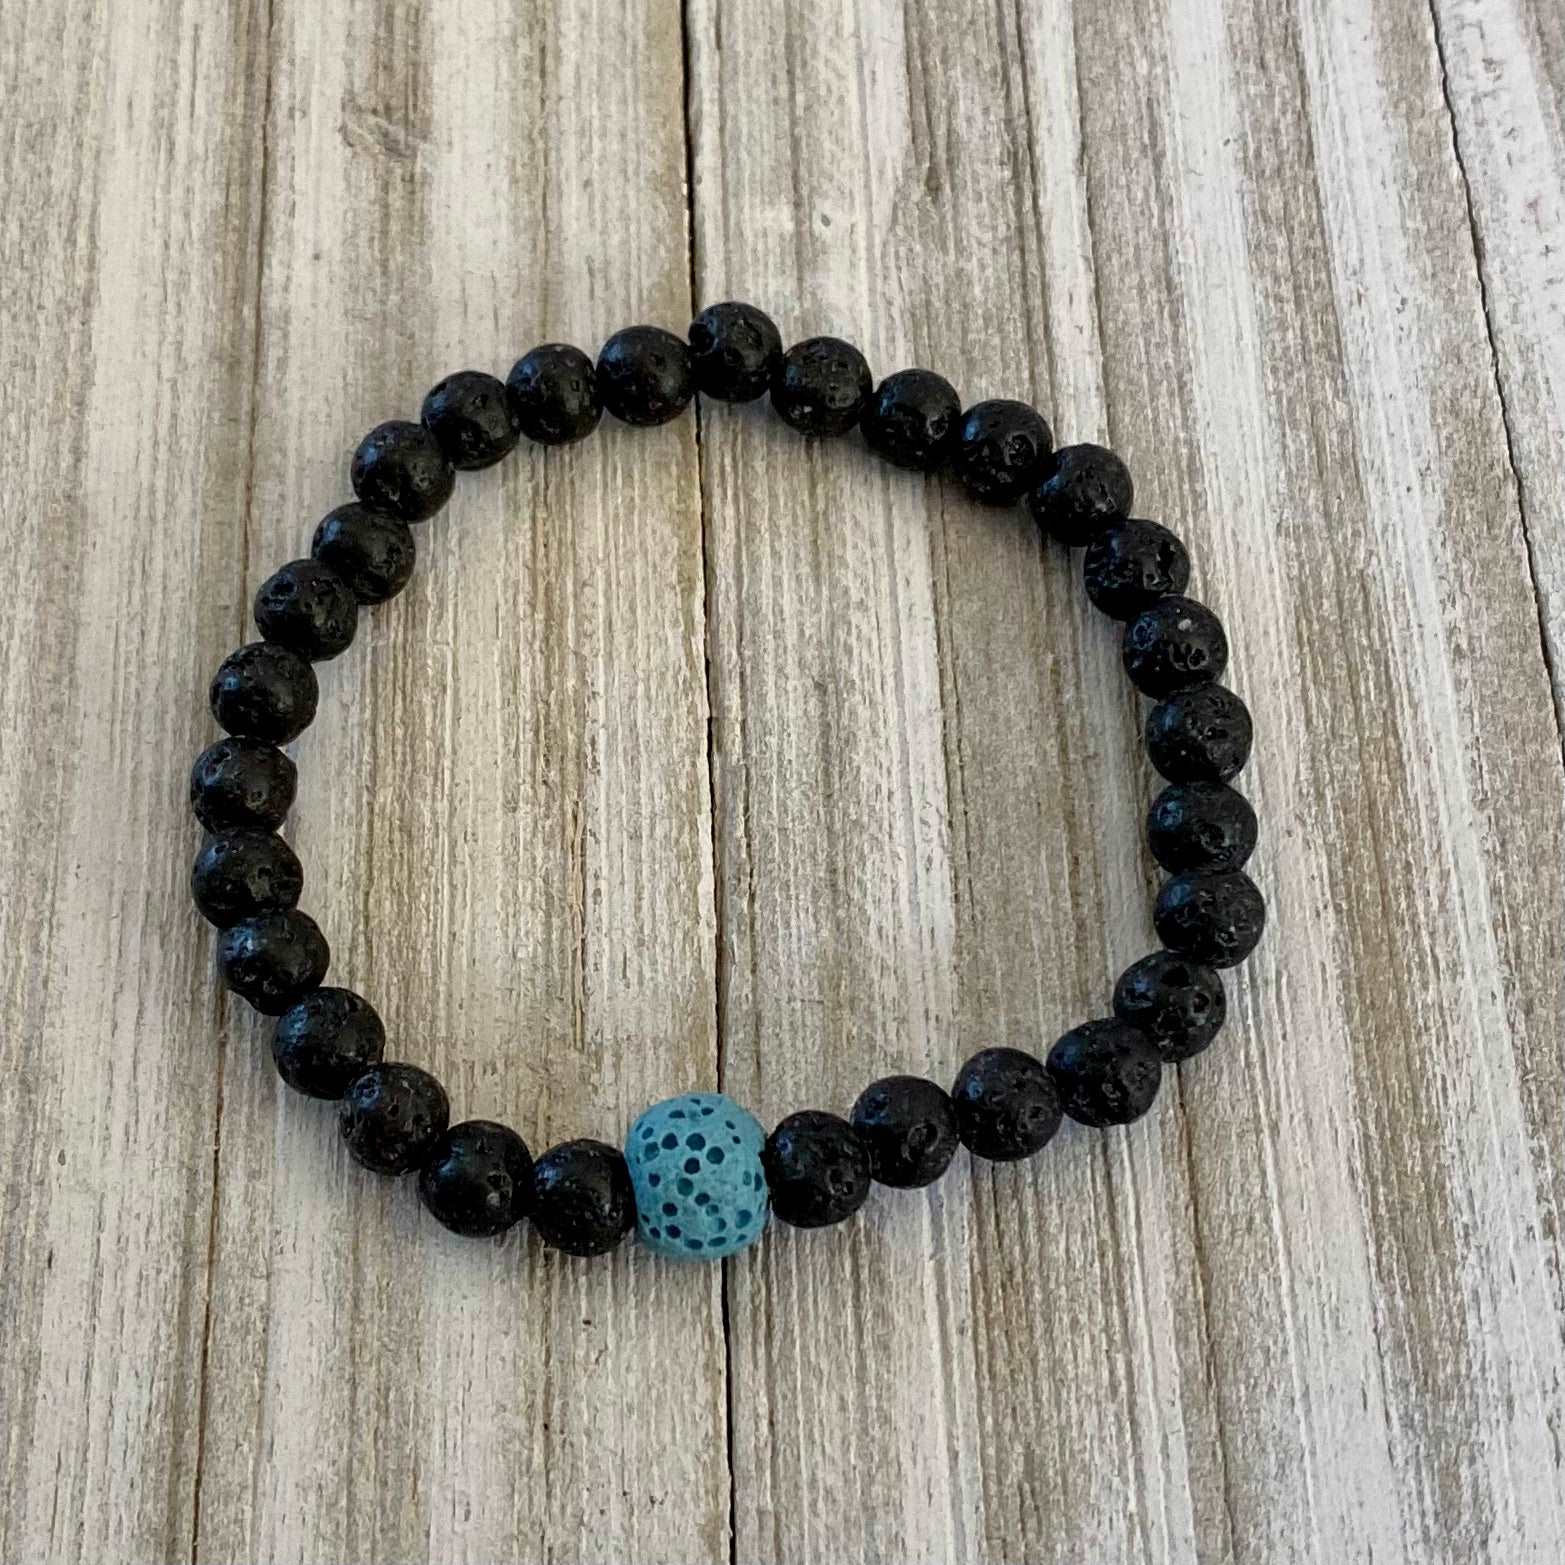 Lava Rock Bracelet - Blue, Teal, Green, Black, Red, Yellow, Purple or Pink - Essential Oil Aromatherapy Jewelry